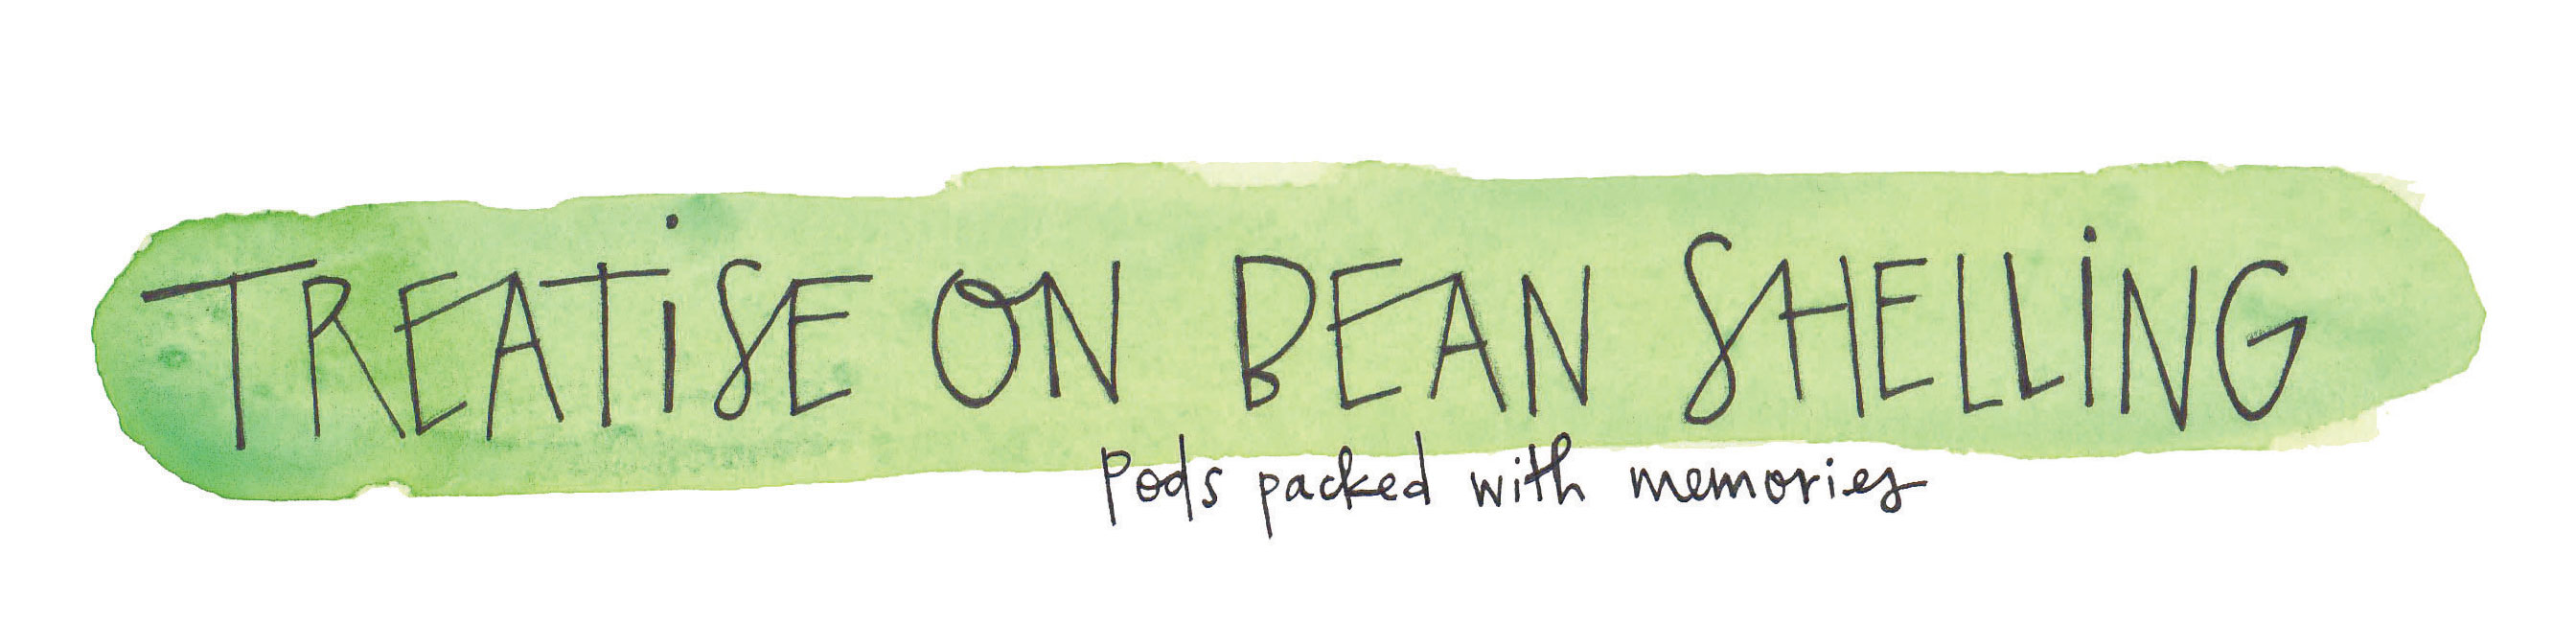 A Treatise on Bean Shelling